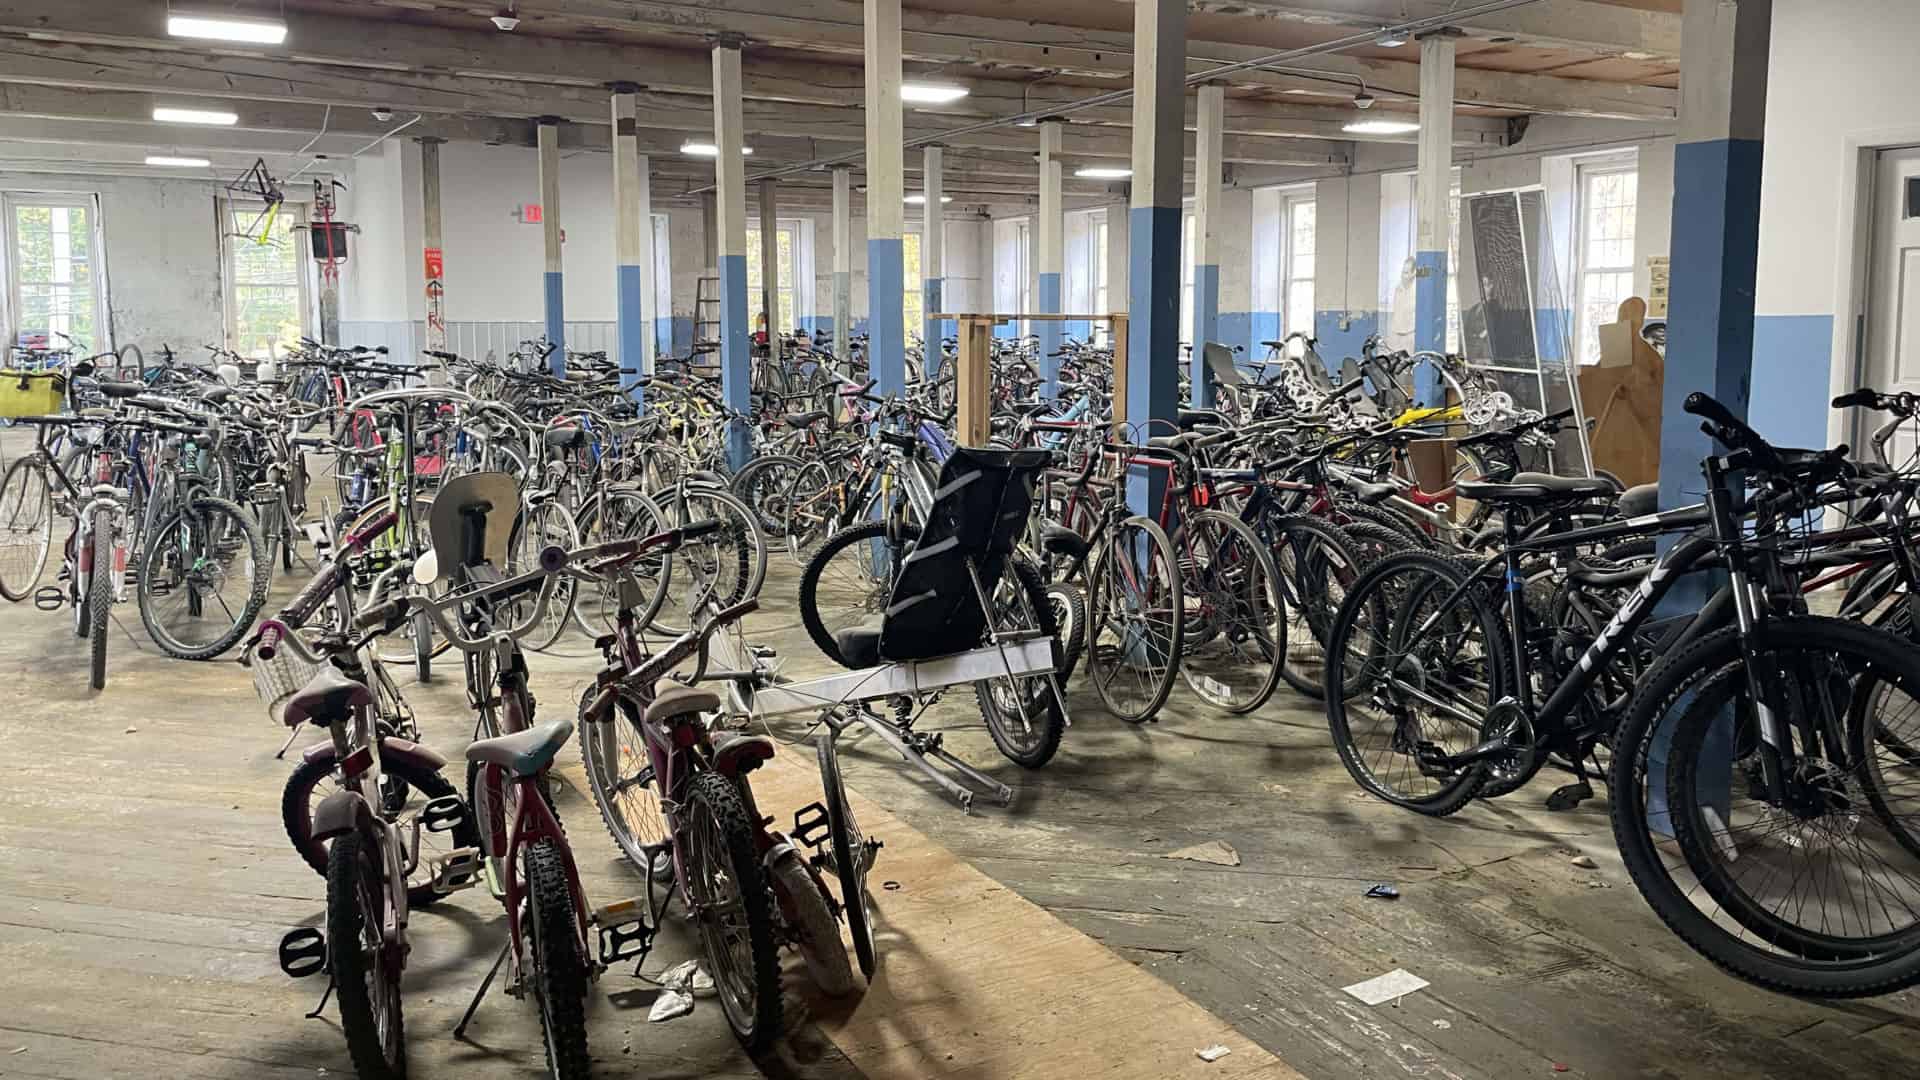 A fleet of repurposed bikes fills an upper floor at the Old Stone Mill in Adams.